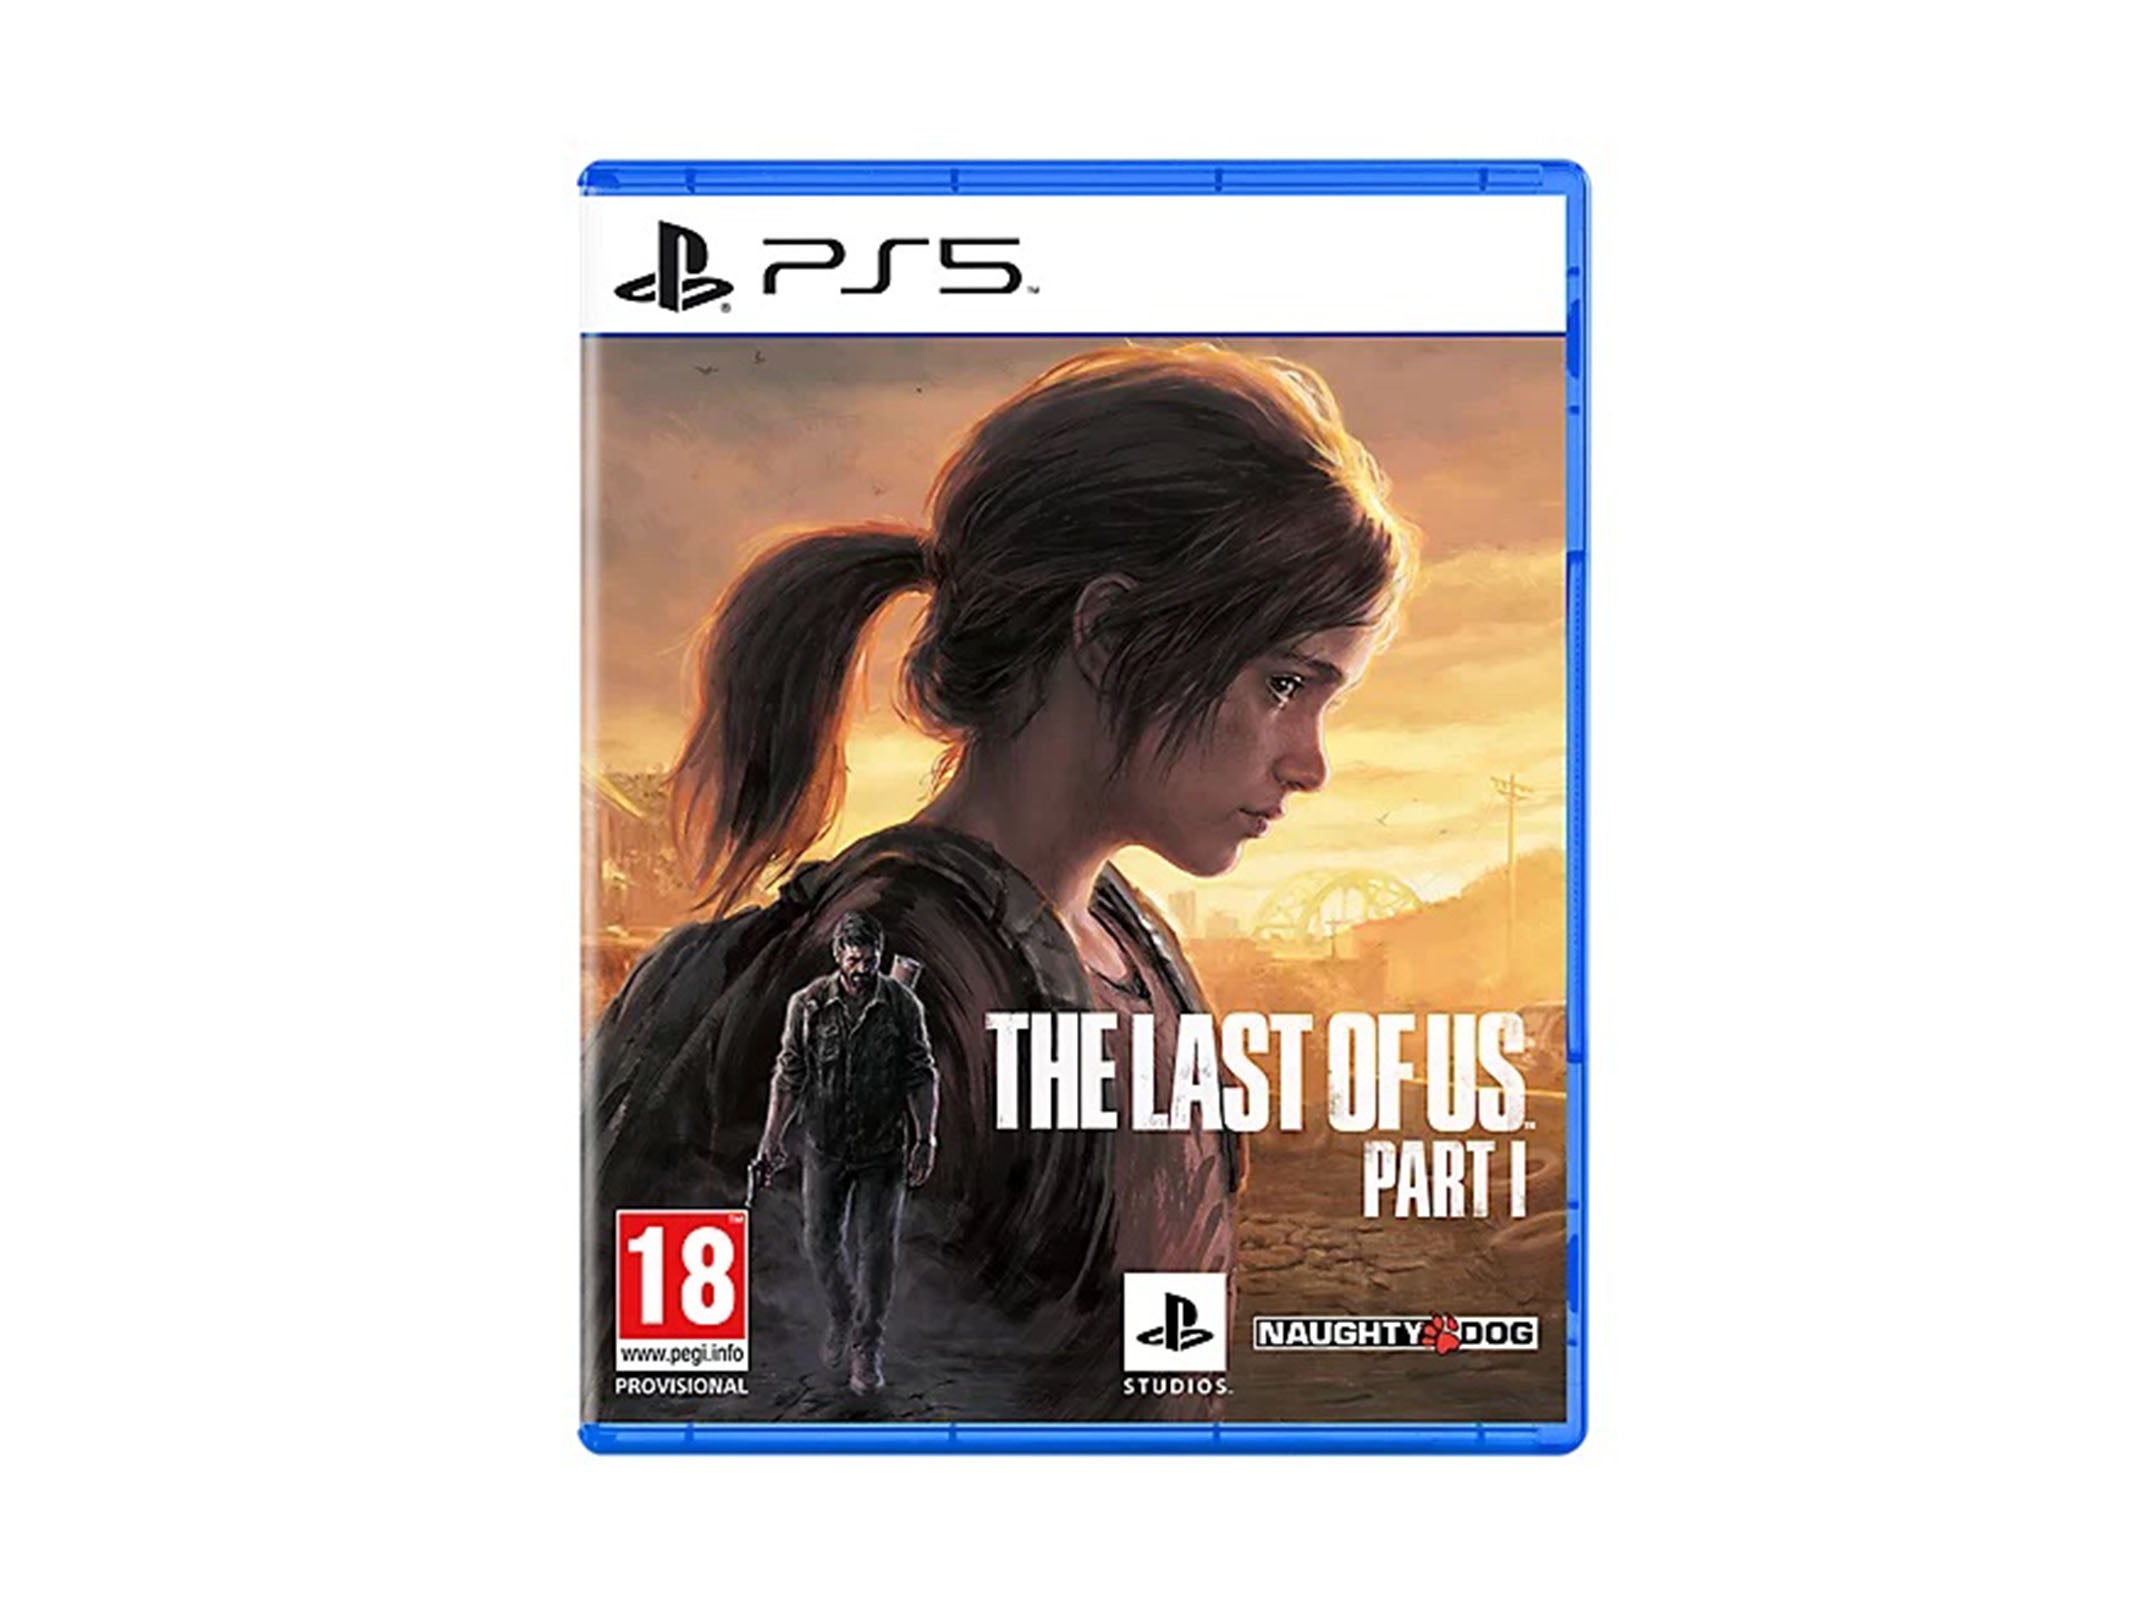 The Last of Us Part I: Everything you need to know about the 